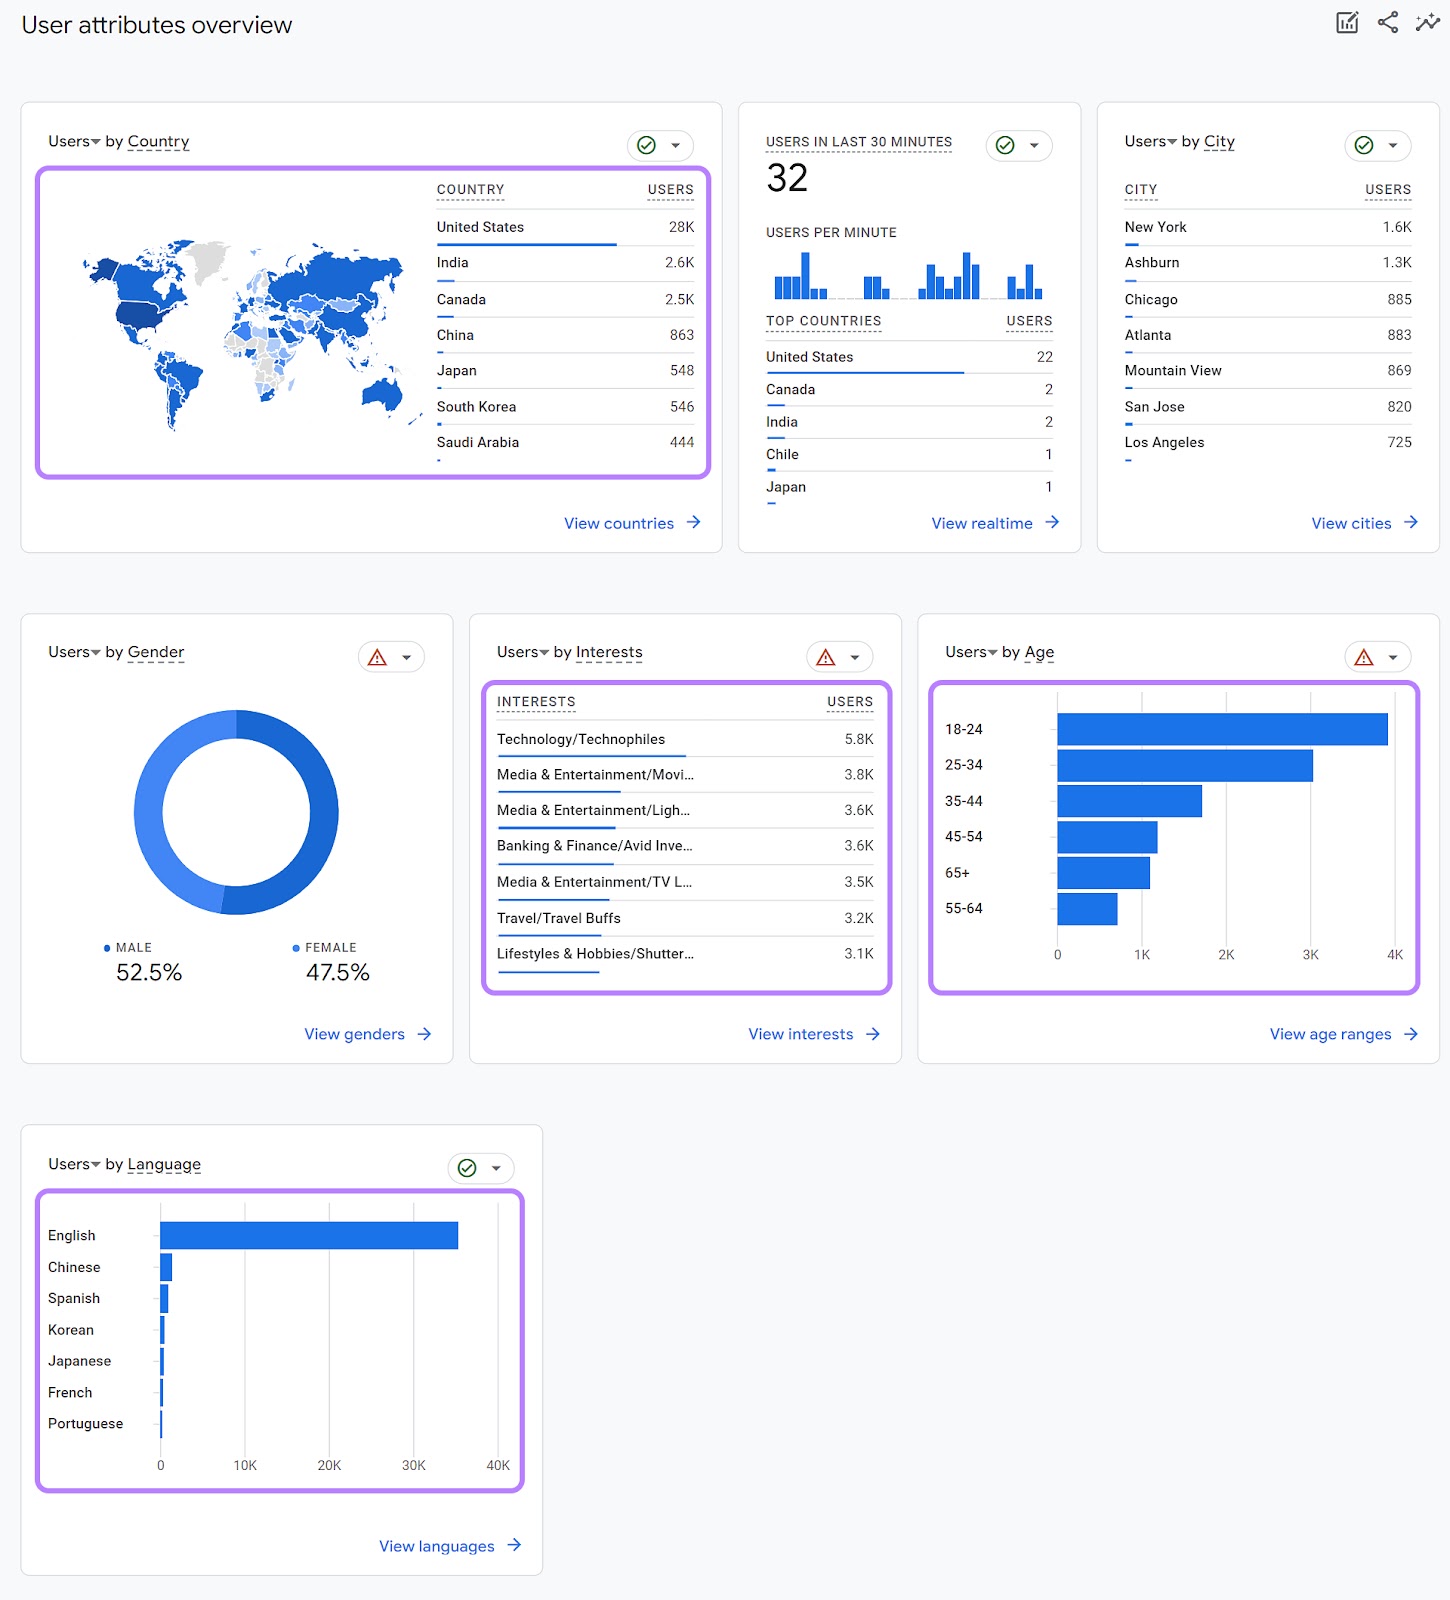 User attributes overview dashboard in Google Analytics 4, showing users interests, languages, locations, gender, and age